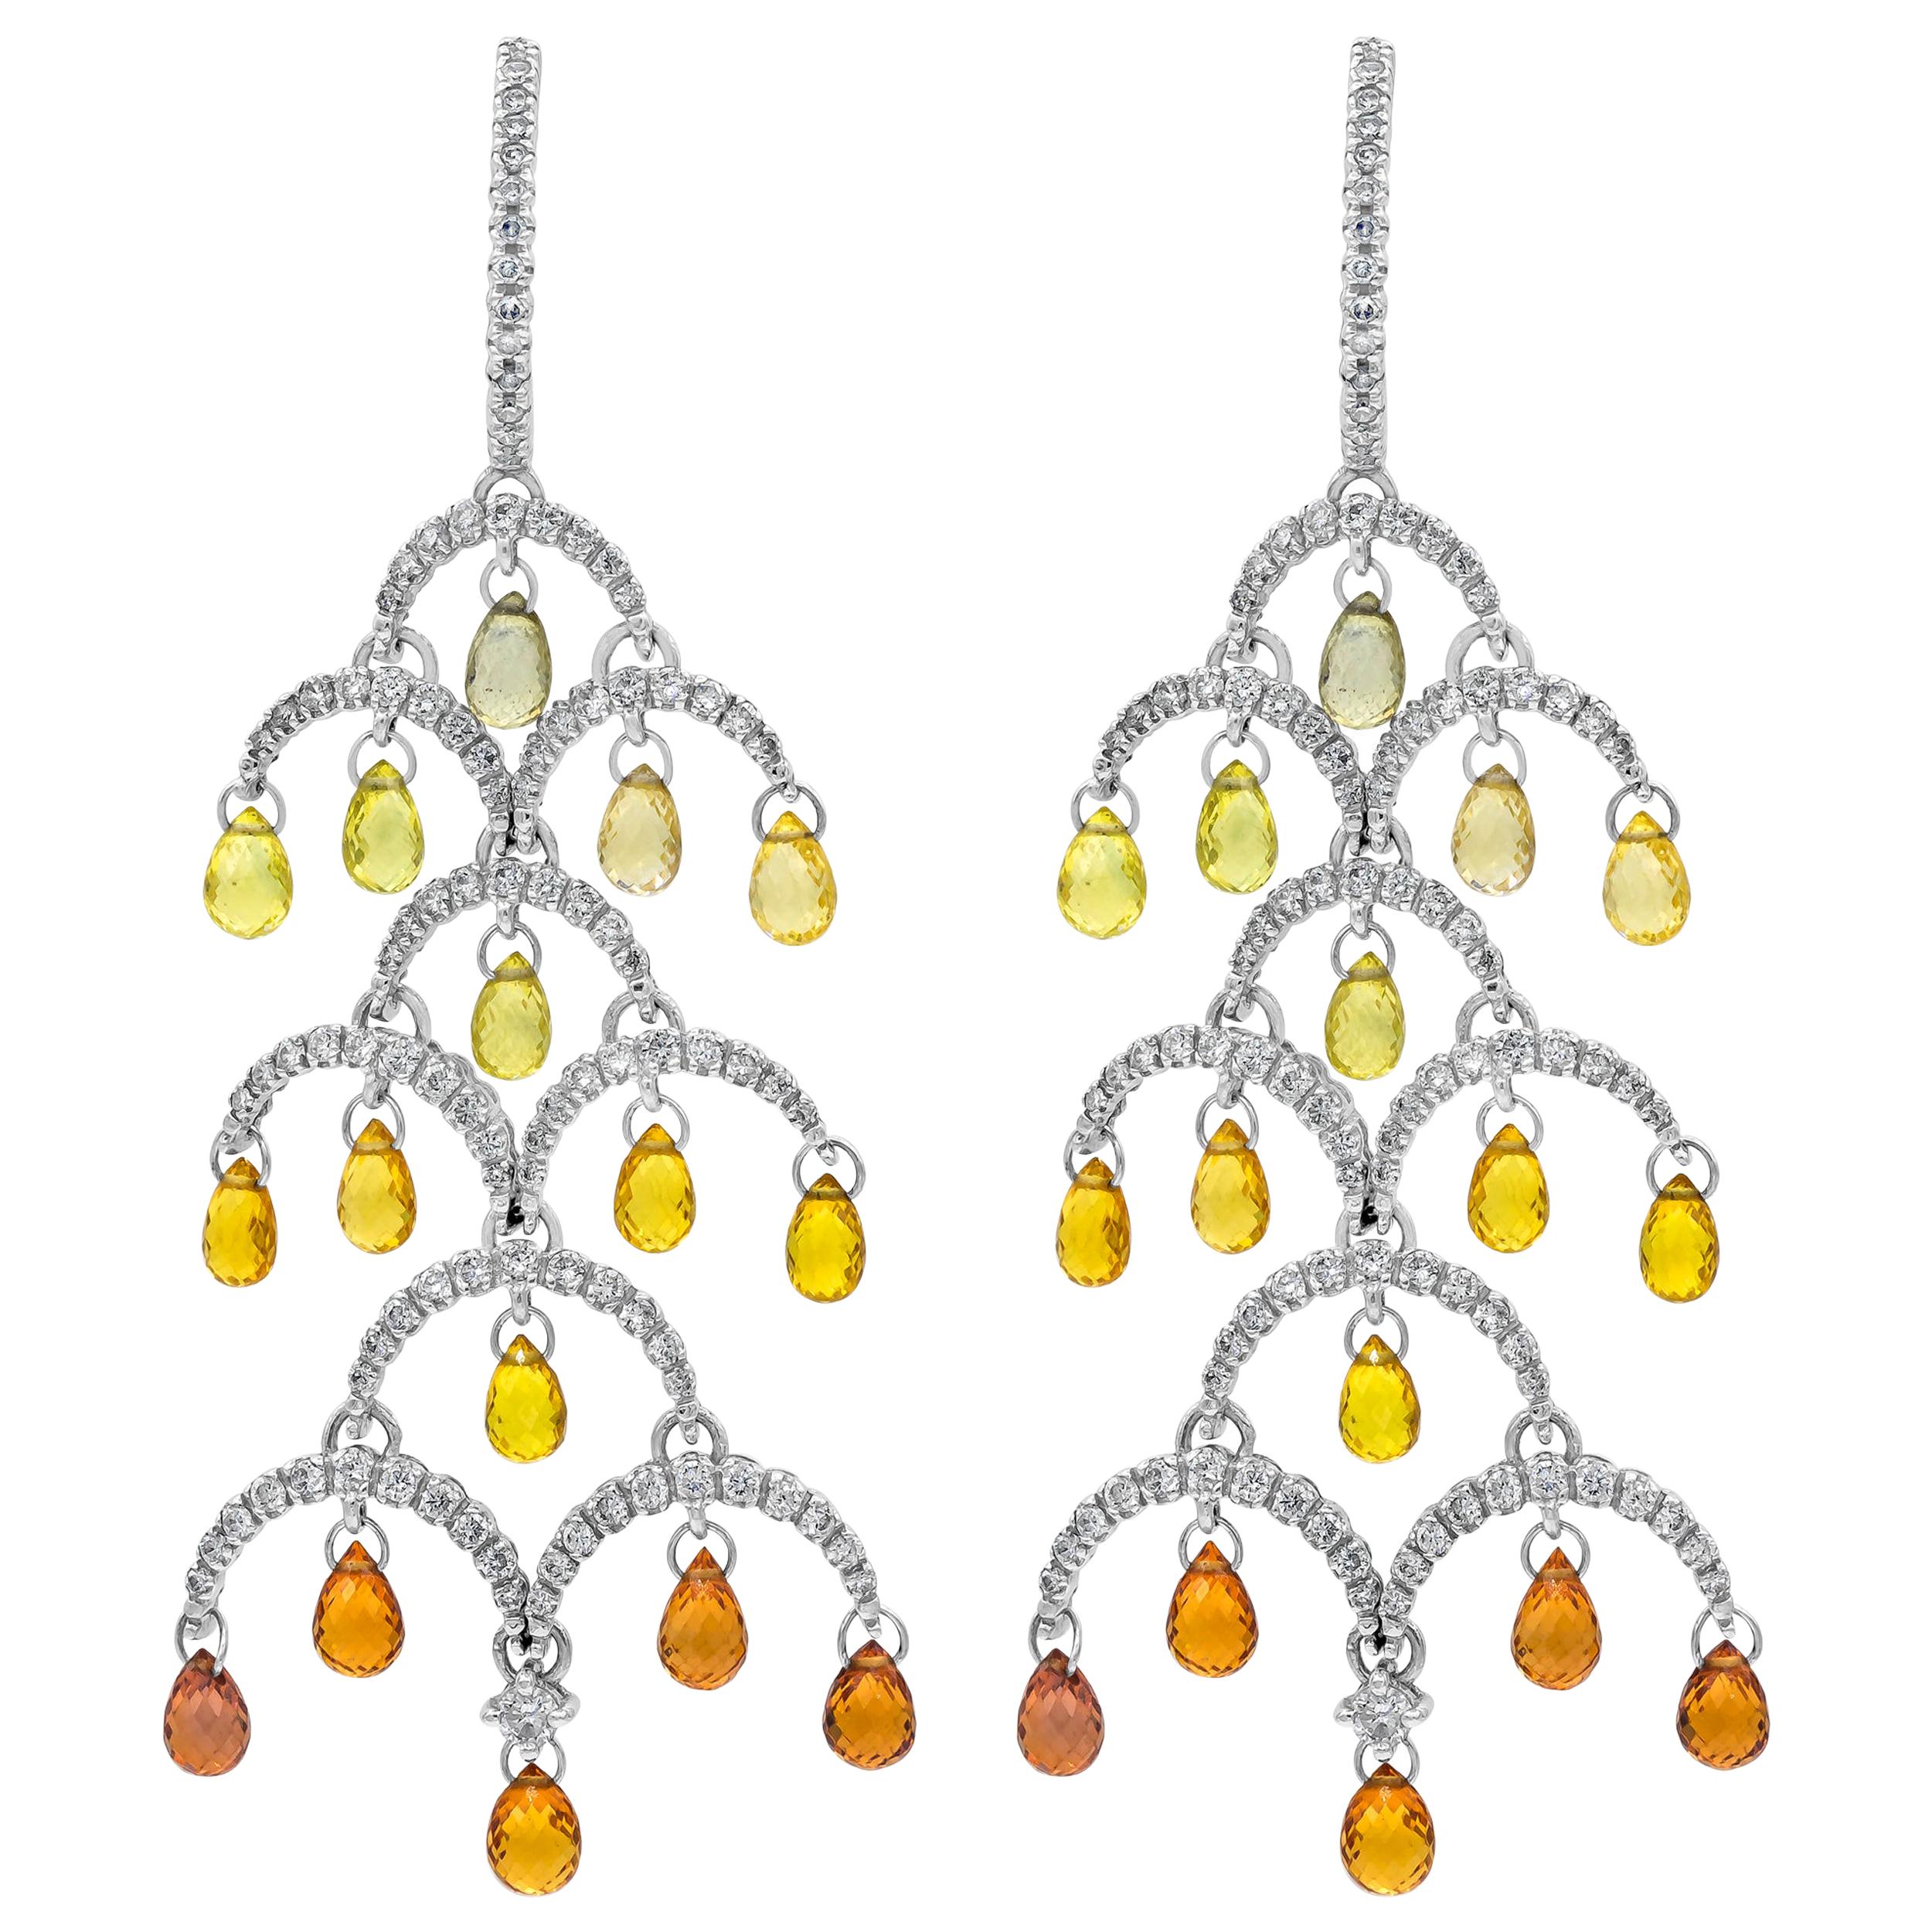 1.97 Carats Total Diamond with Natural Briolette Sapphires Chandelier Earrings For Sale